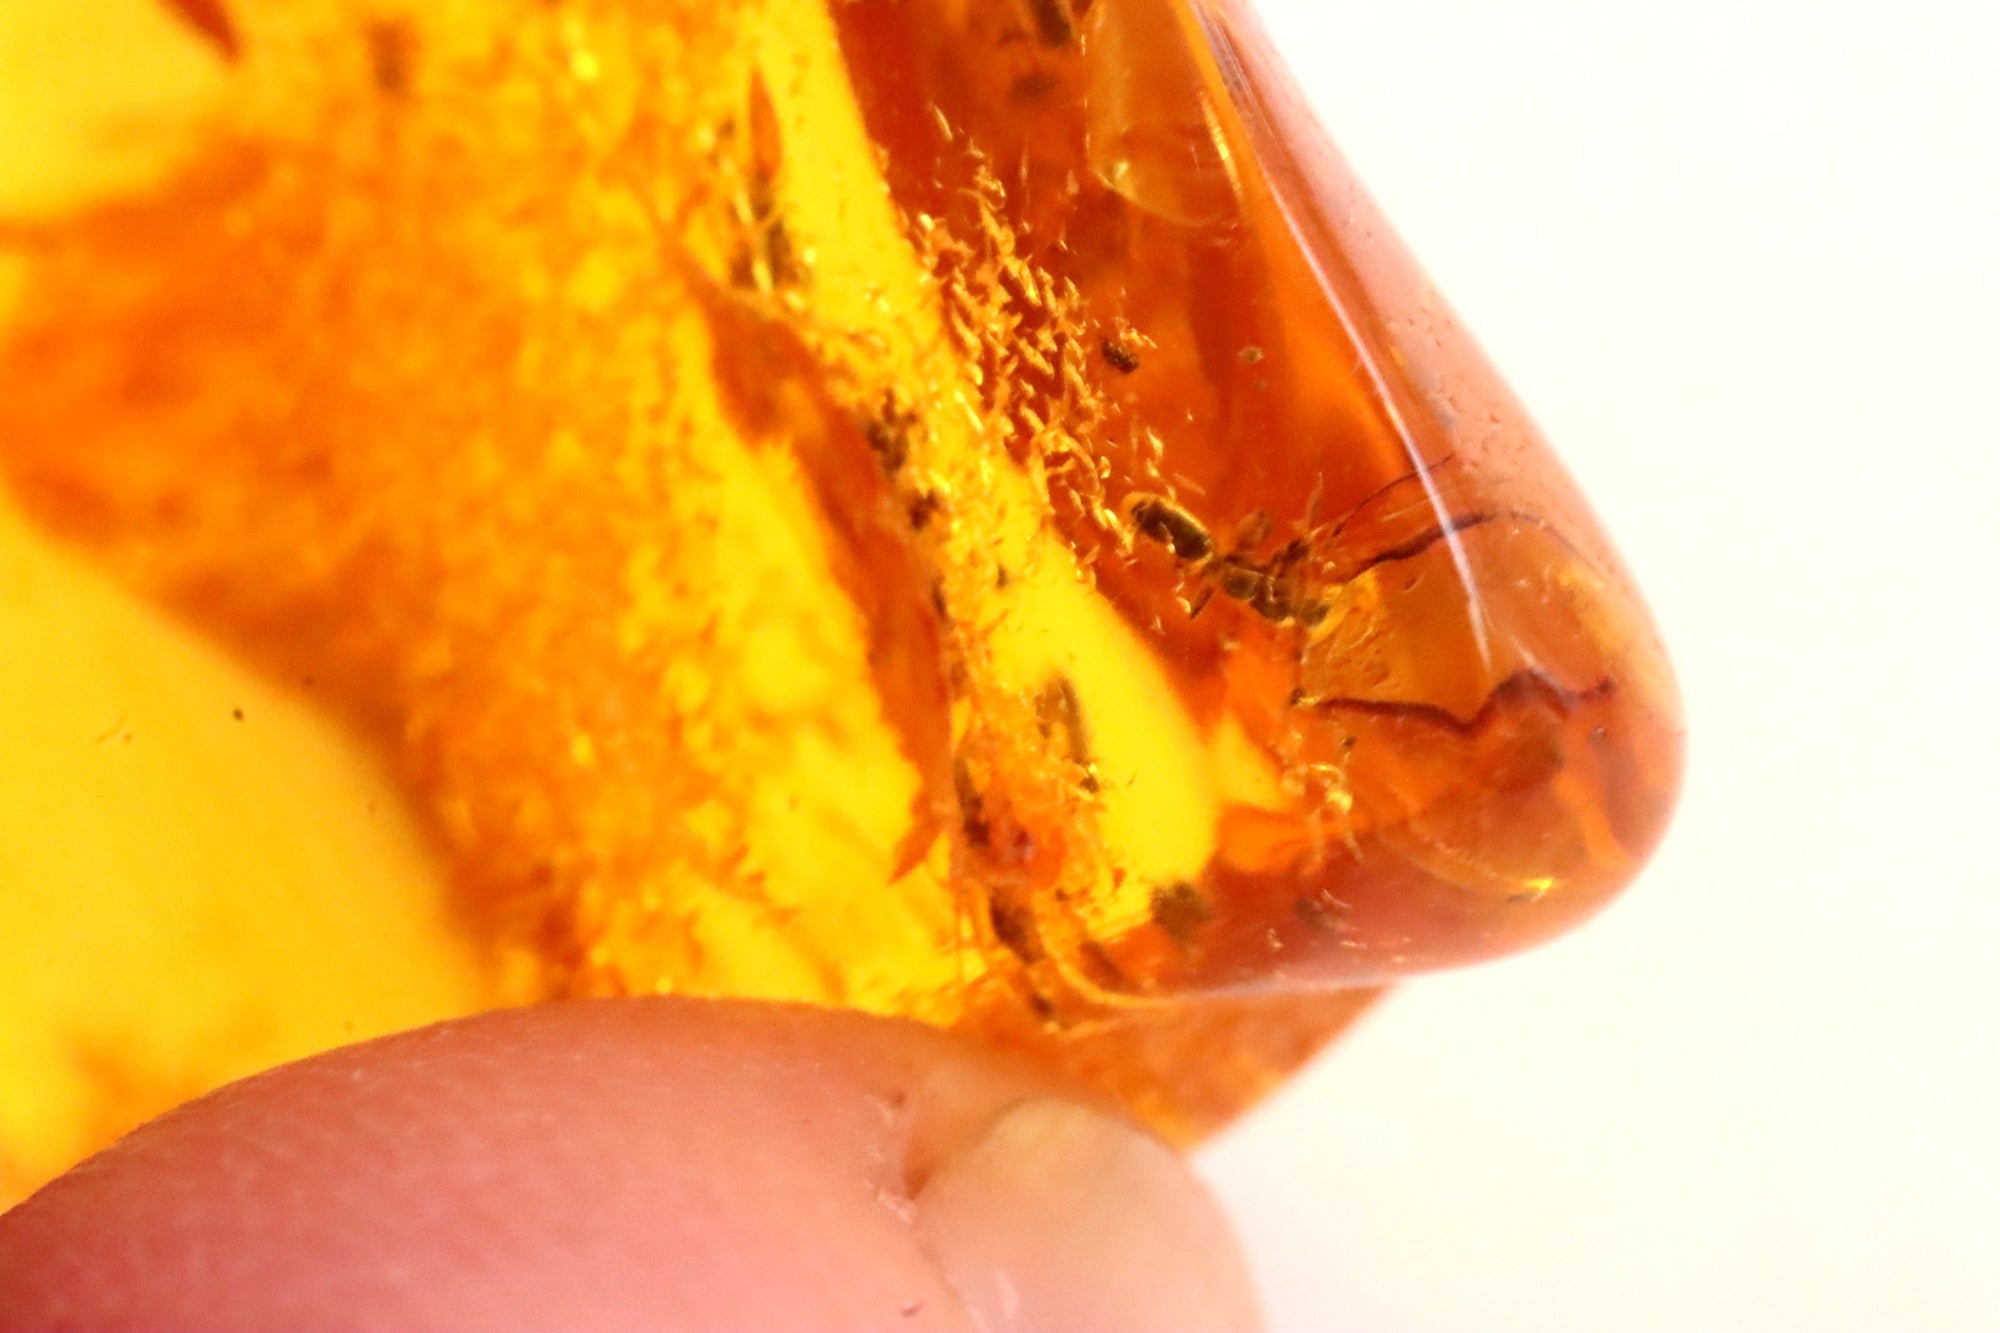 Insect in Amber Small Piece